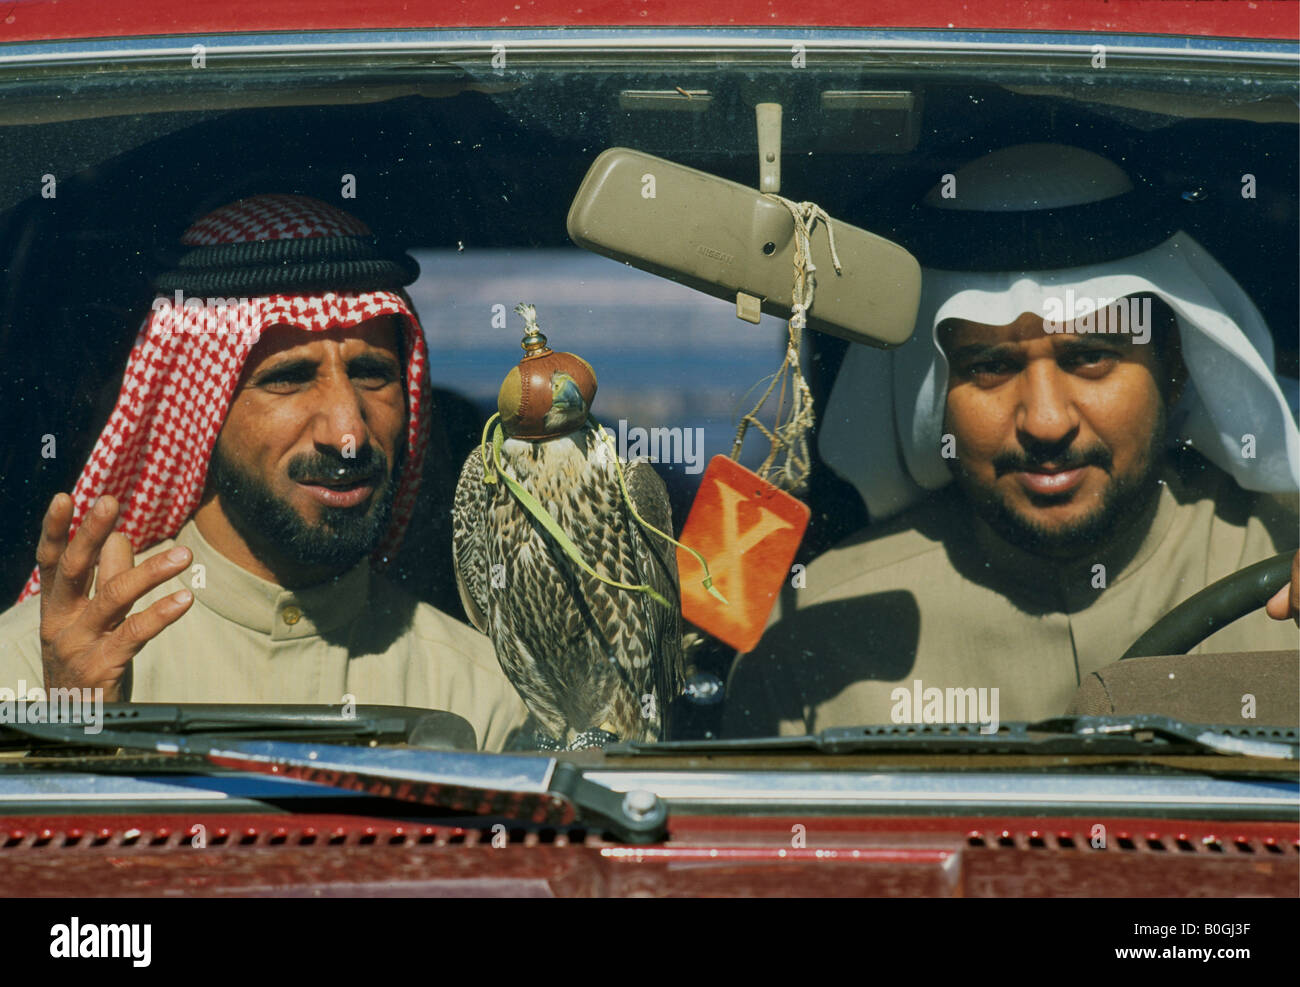 Arab men with their pet falcon in a car, Kuwait. Stock Photo